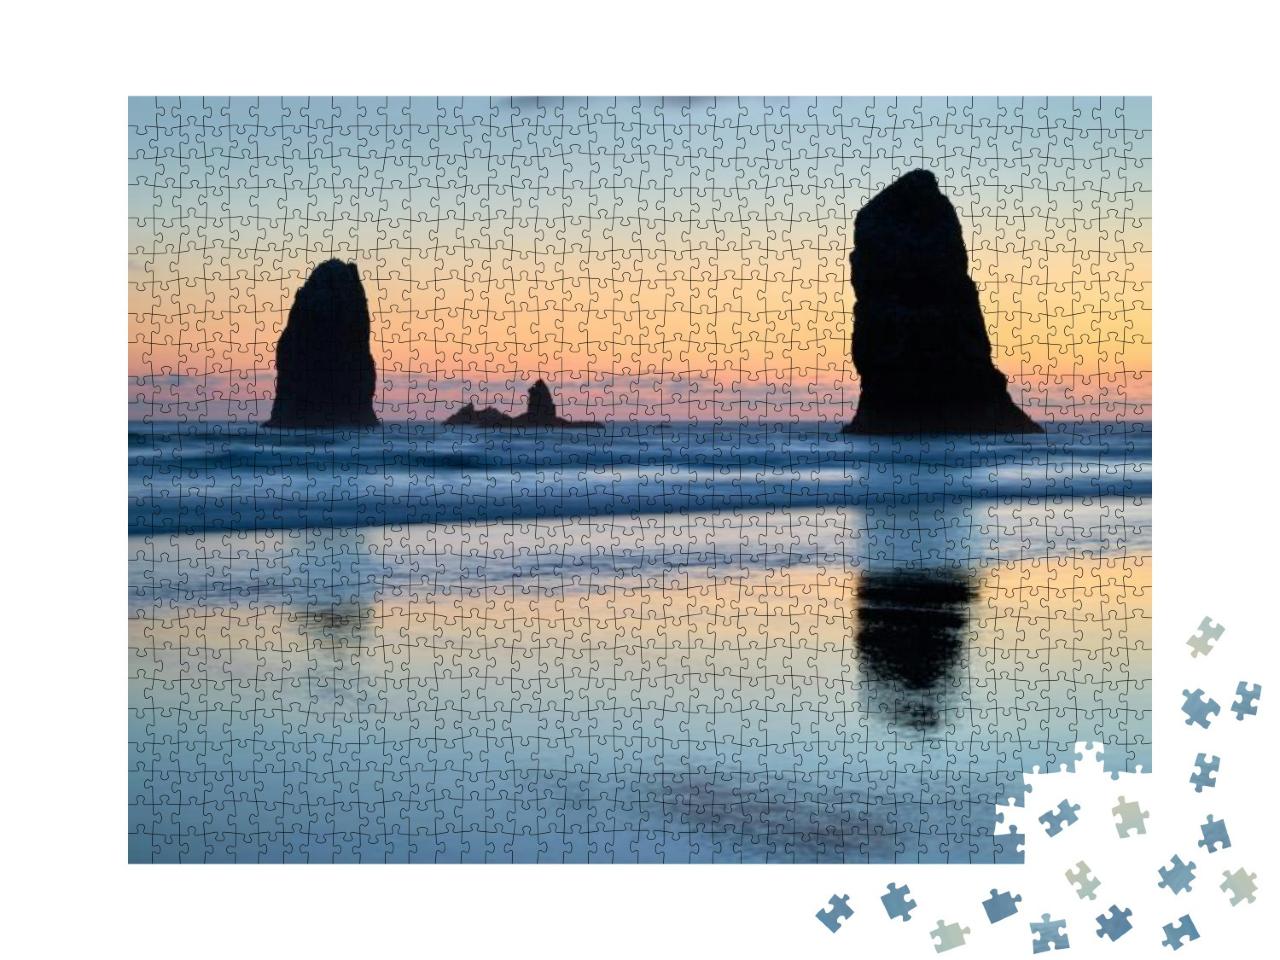 The Needles & Surf Cannon Beach. Sunset At the Needles in... Jigsaw Puzzle with 1000 pieces